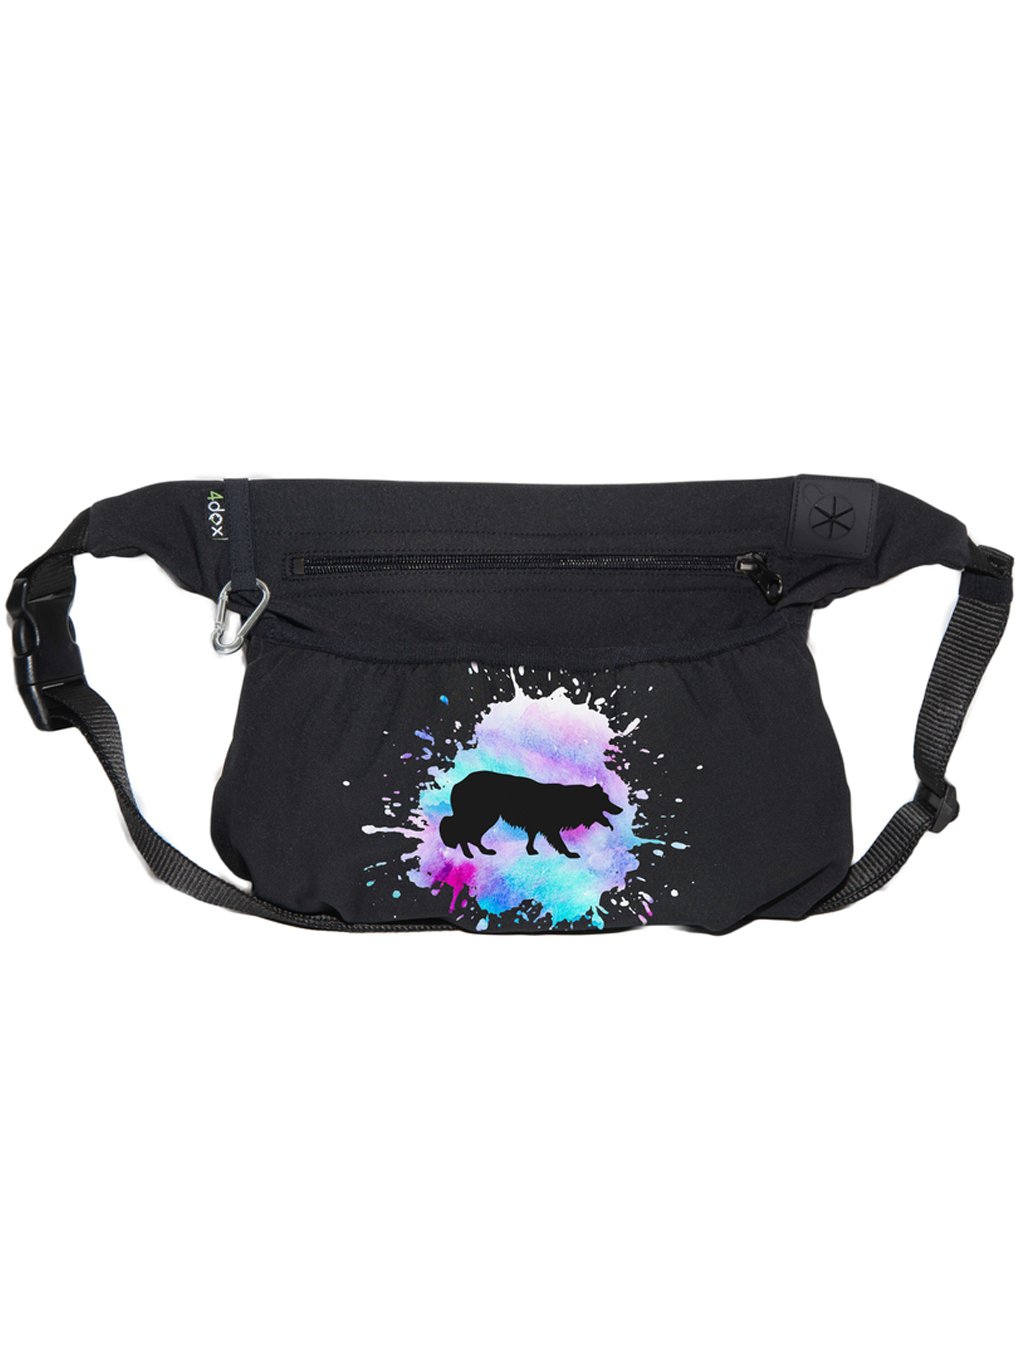 Treat pouch  XL 1K Bordercolia longhaired BC2 4dox